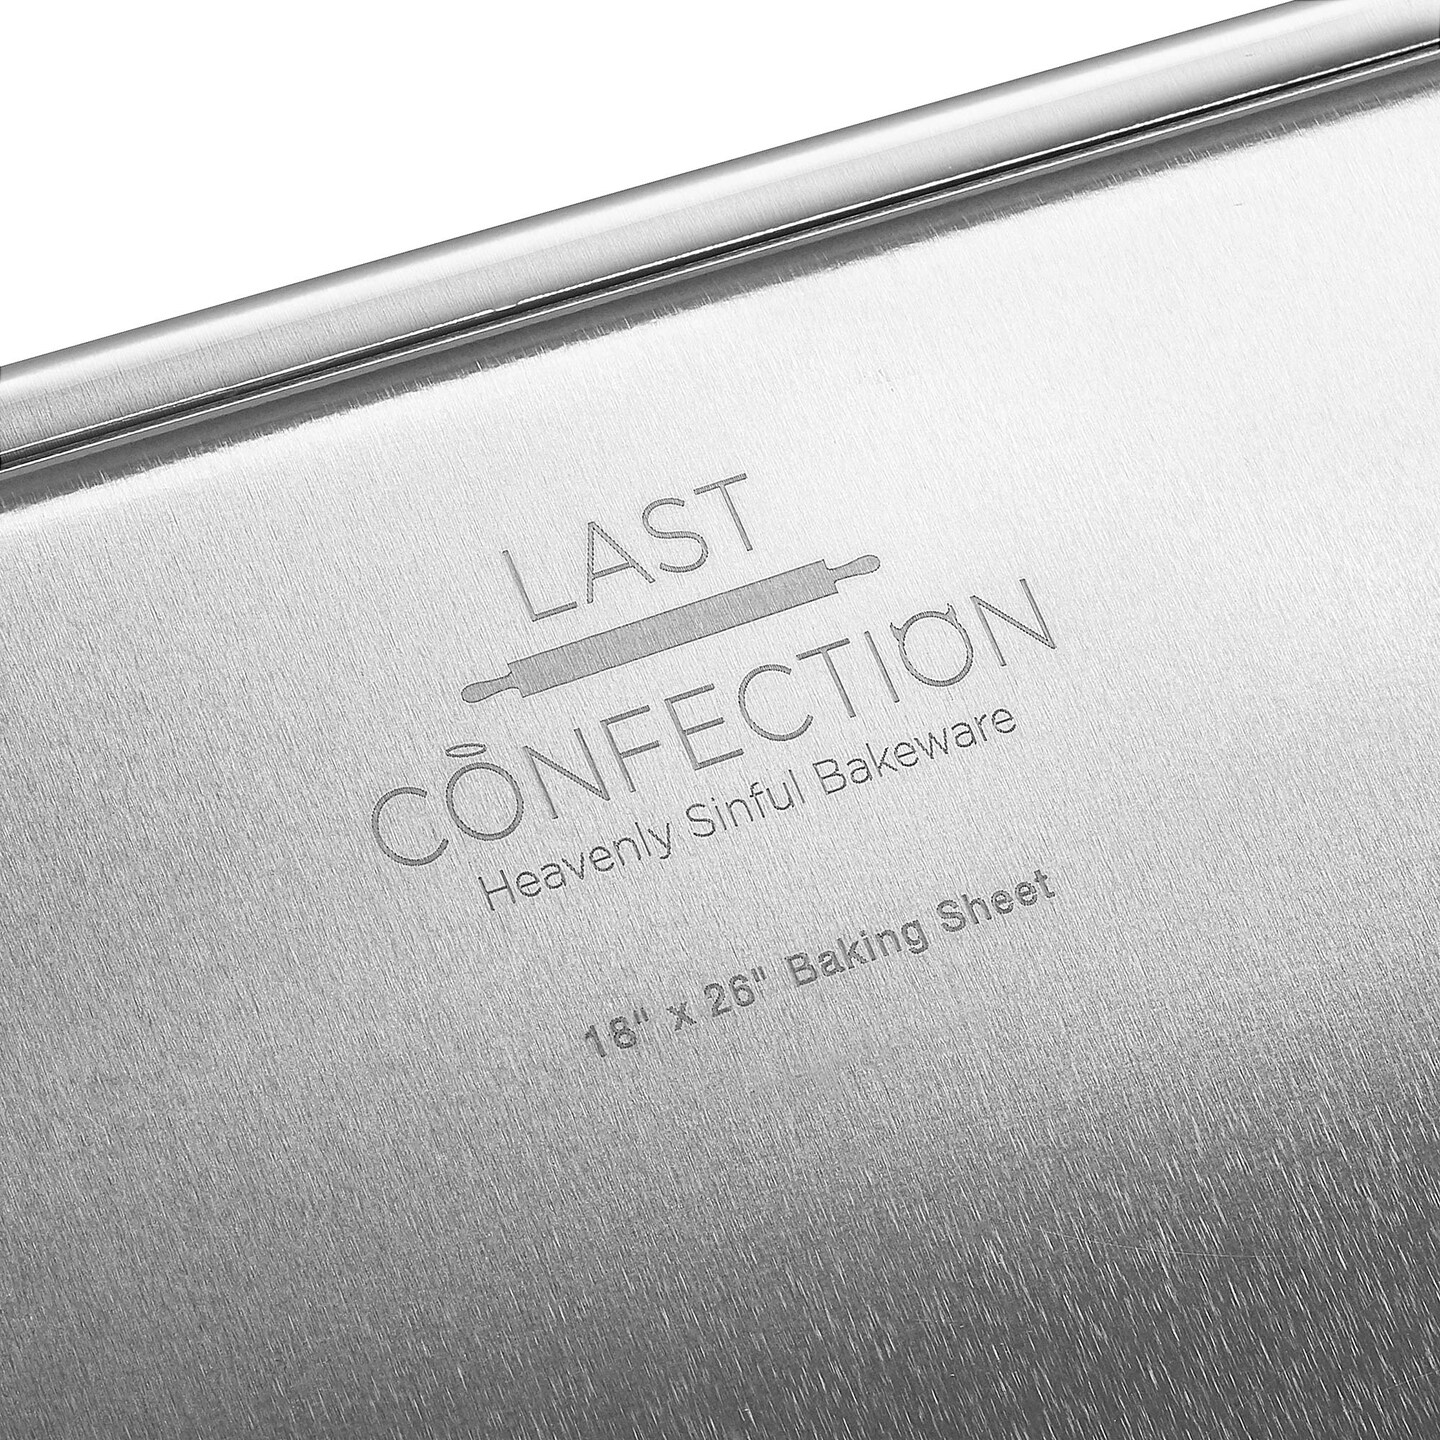 Last Confection 18&#x22; x 26&#x22; Commercial Grade Baking Sheet Pans, Aluminum Full-Size Rimmed Cookie Sheet Trays